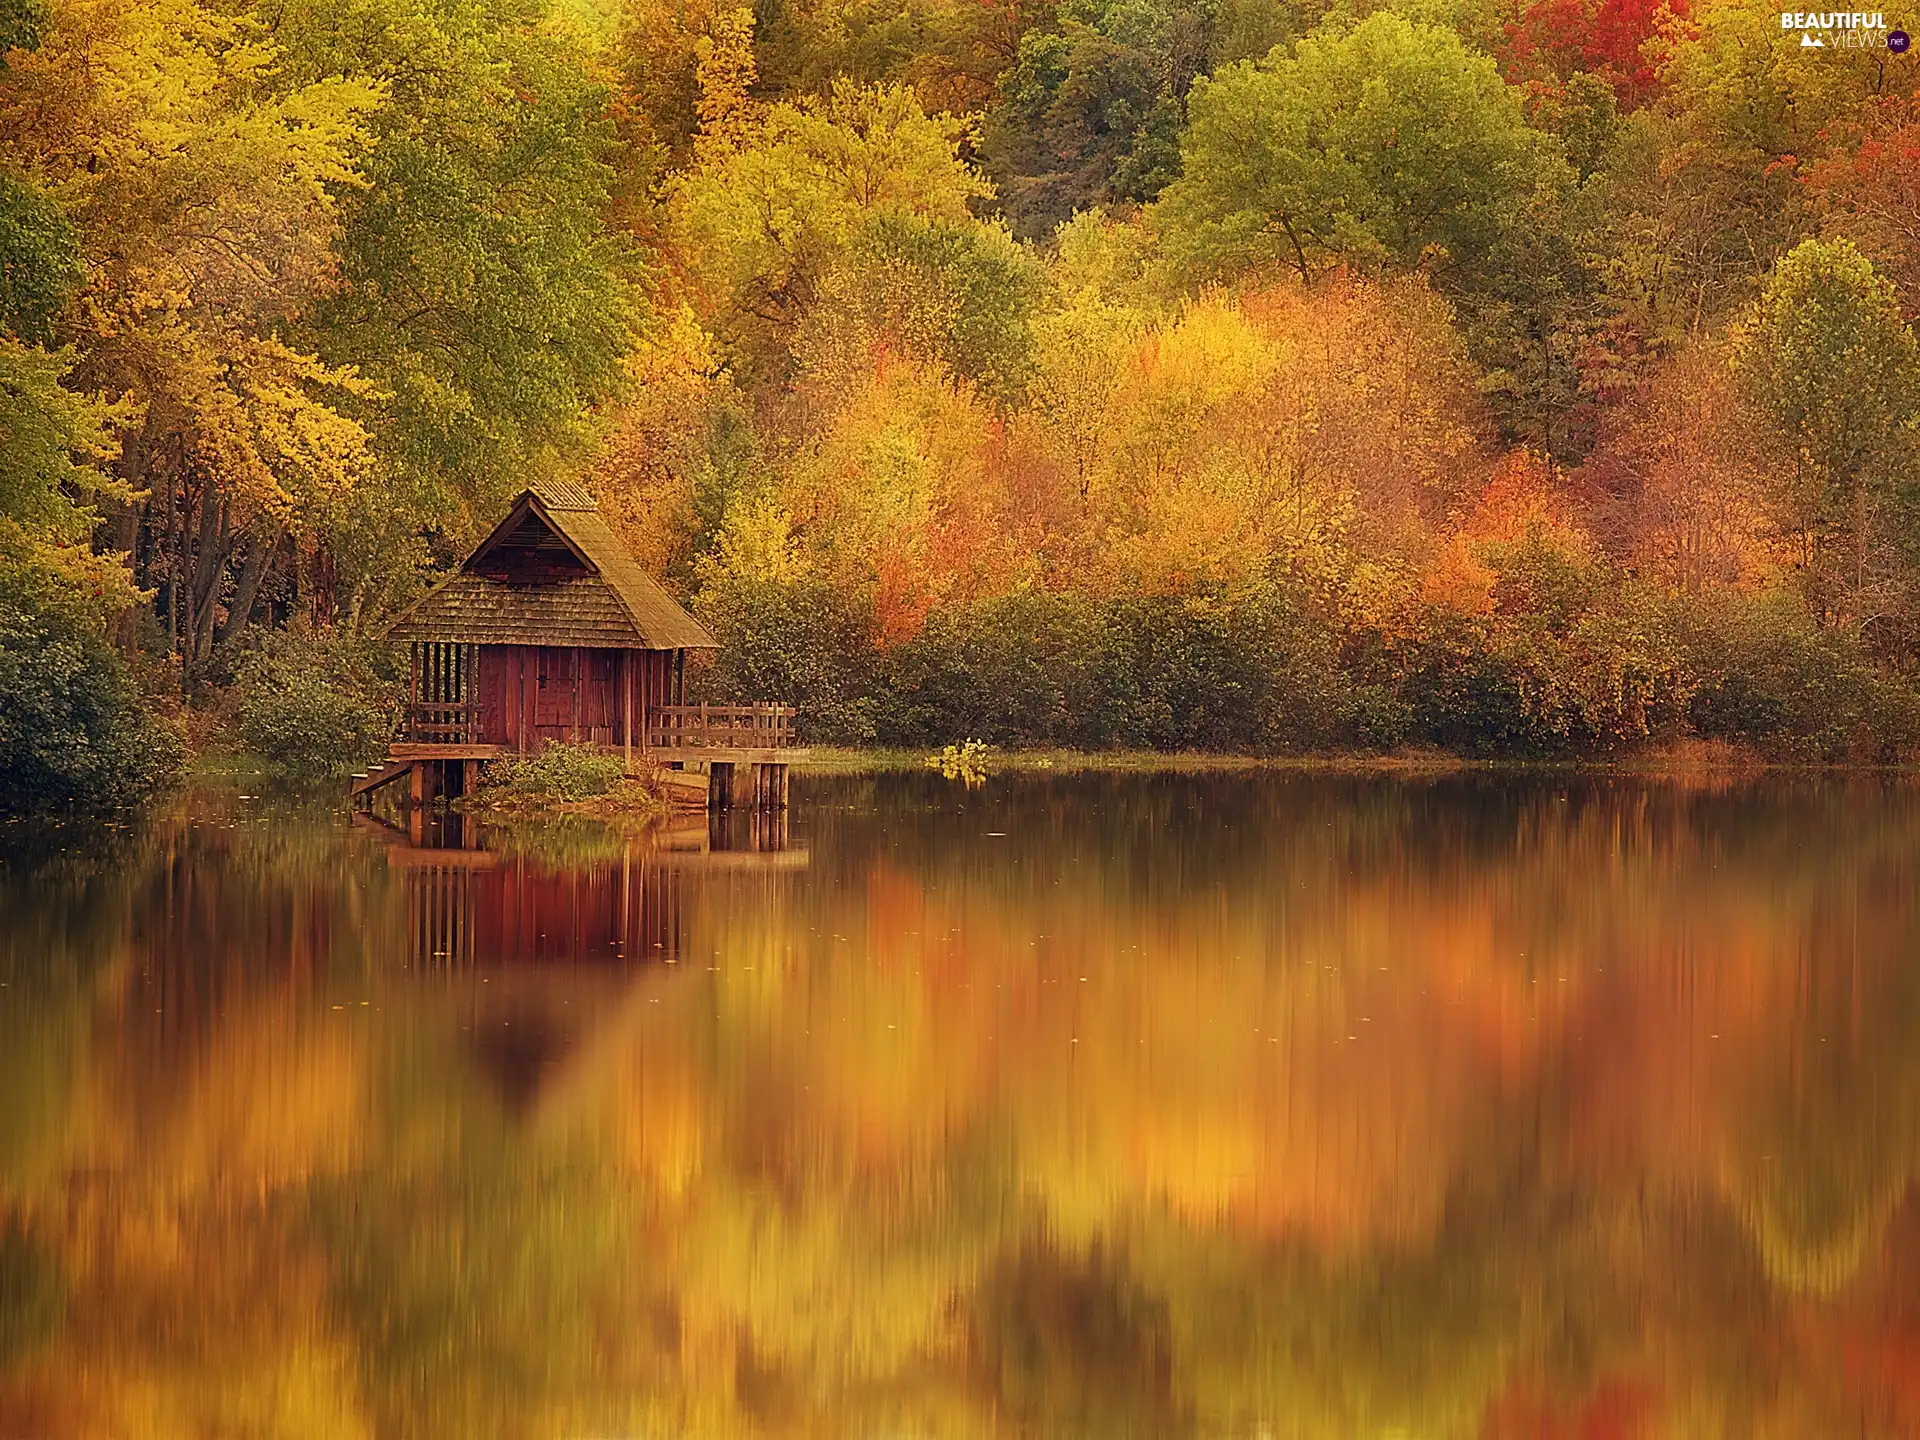 viewes, lake, reflection, autumn, Home, trees